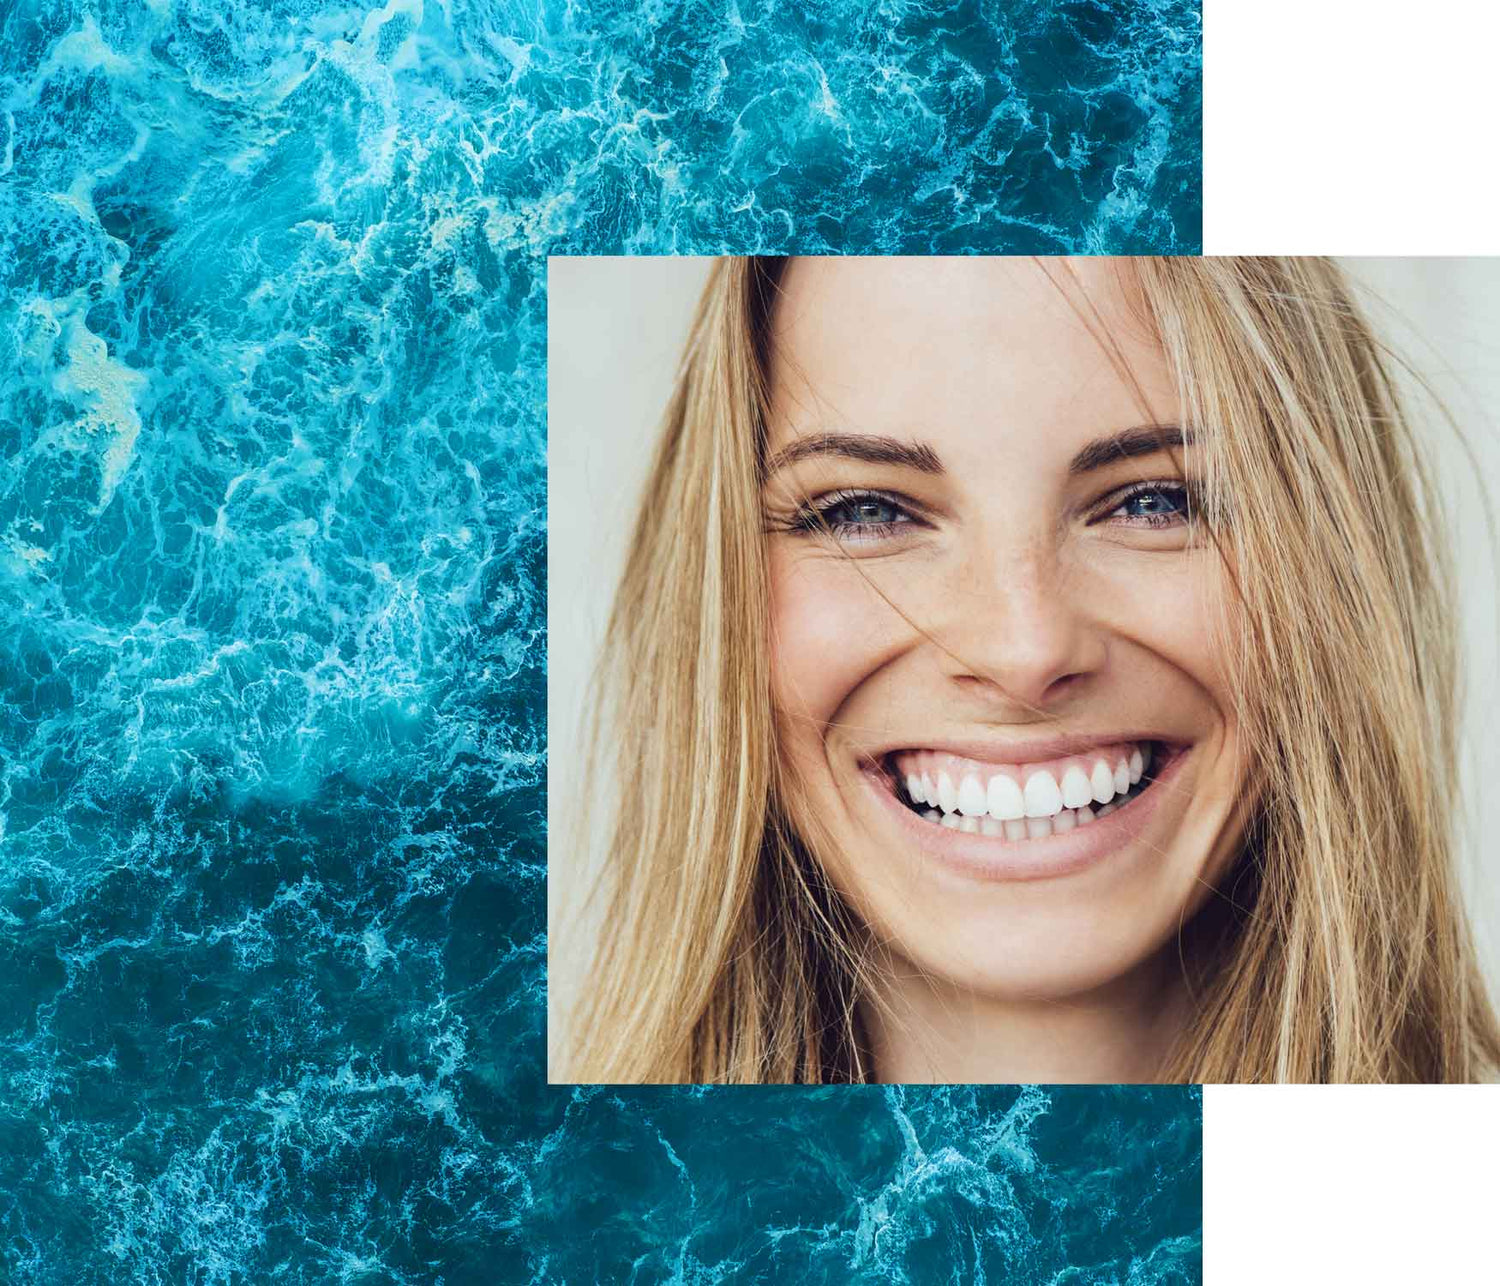 Image of ocean waters overlayed with close up portrait of blonde woman smiling at camera